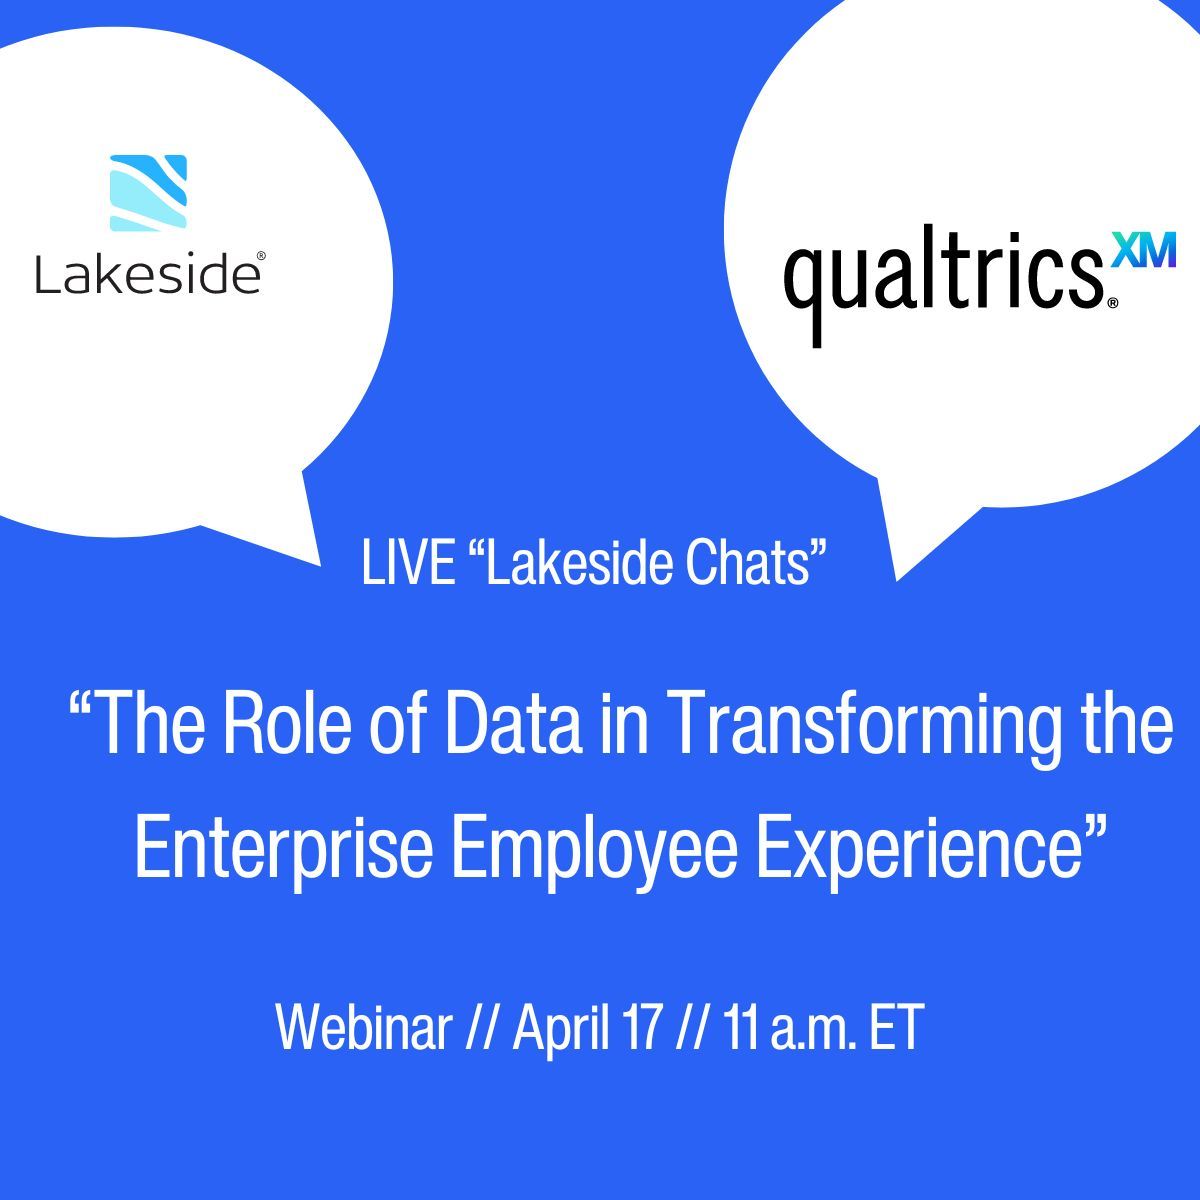 How can combining quantitative and qualitative data boost the employee experience? Hear from the experts at a live webinar with Lakeside and @Qualtrics at 11 am ET on Wednesday, April 17. It's a conversation you won't want to miss. bit.ly/3TTsk9t